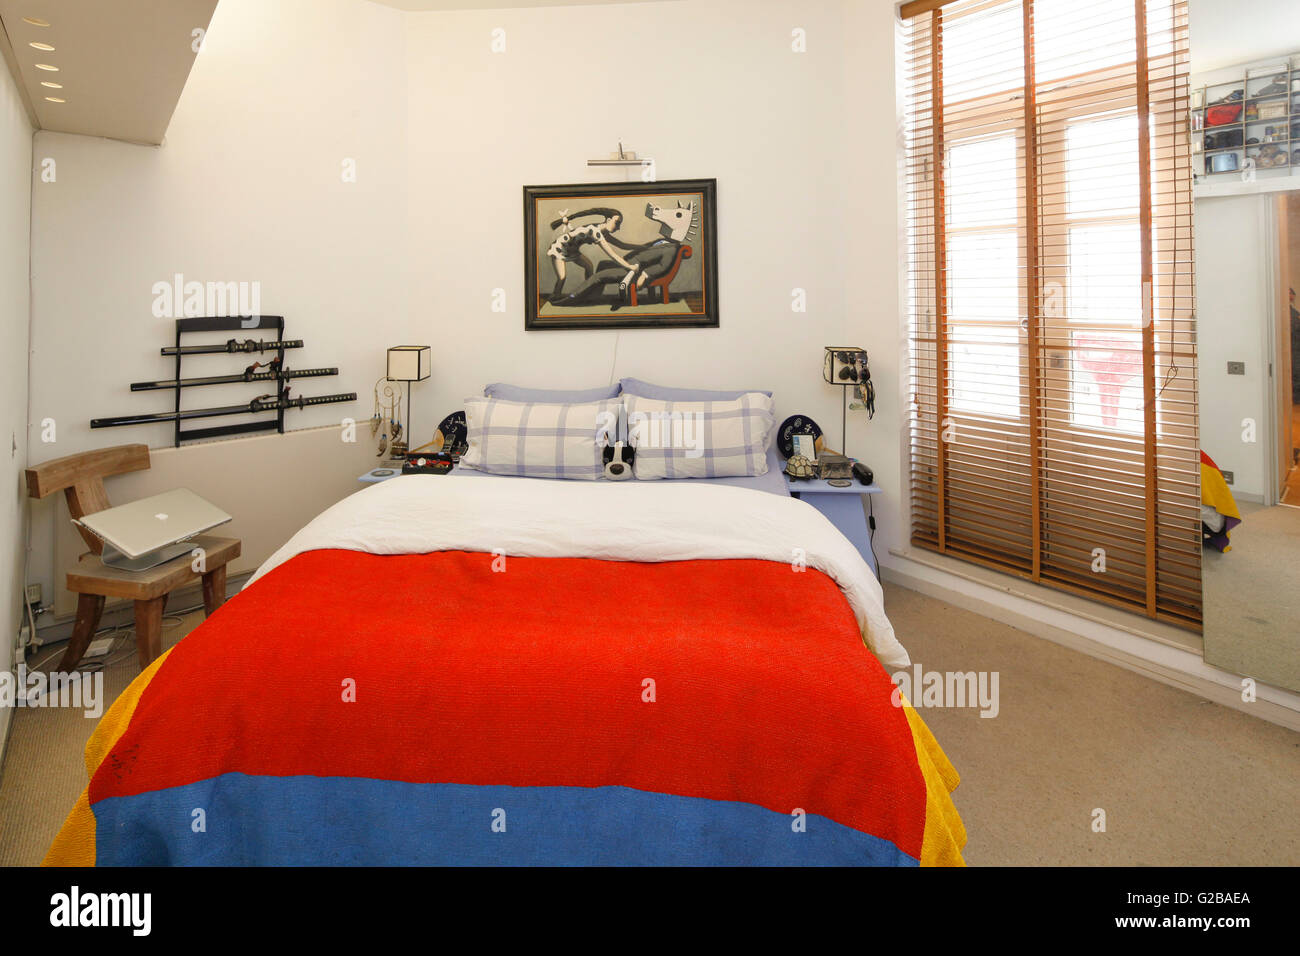 Foley House, Maddox Street. Modern bedroom with bright colourful duvet on bed. Contemporary furniture and decoration. Ceiling to floor window. Stock Photo